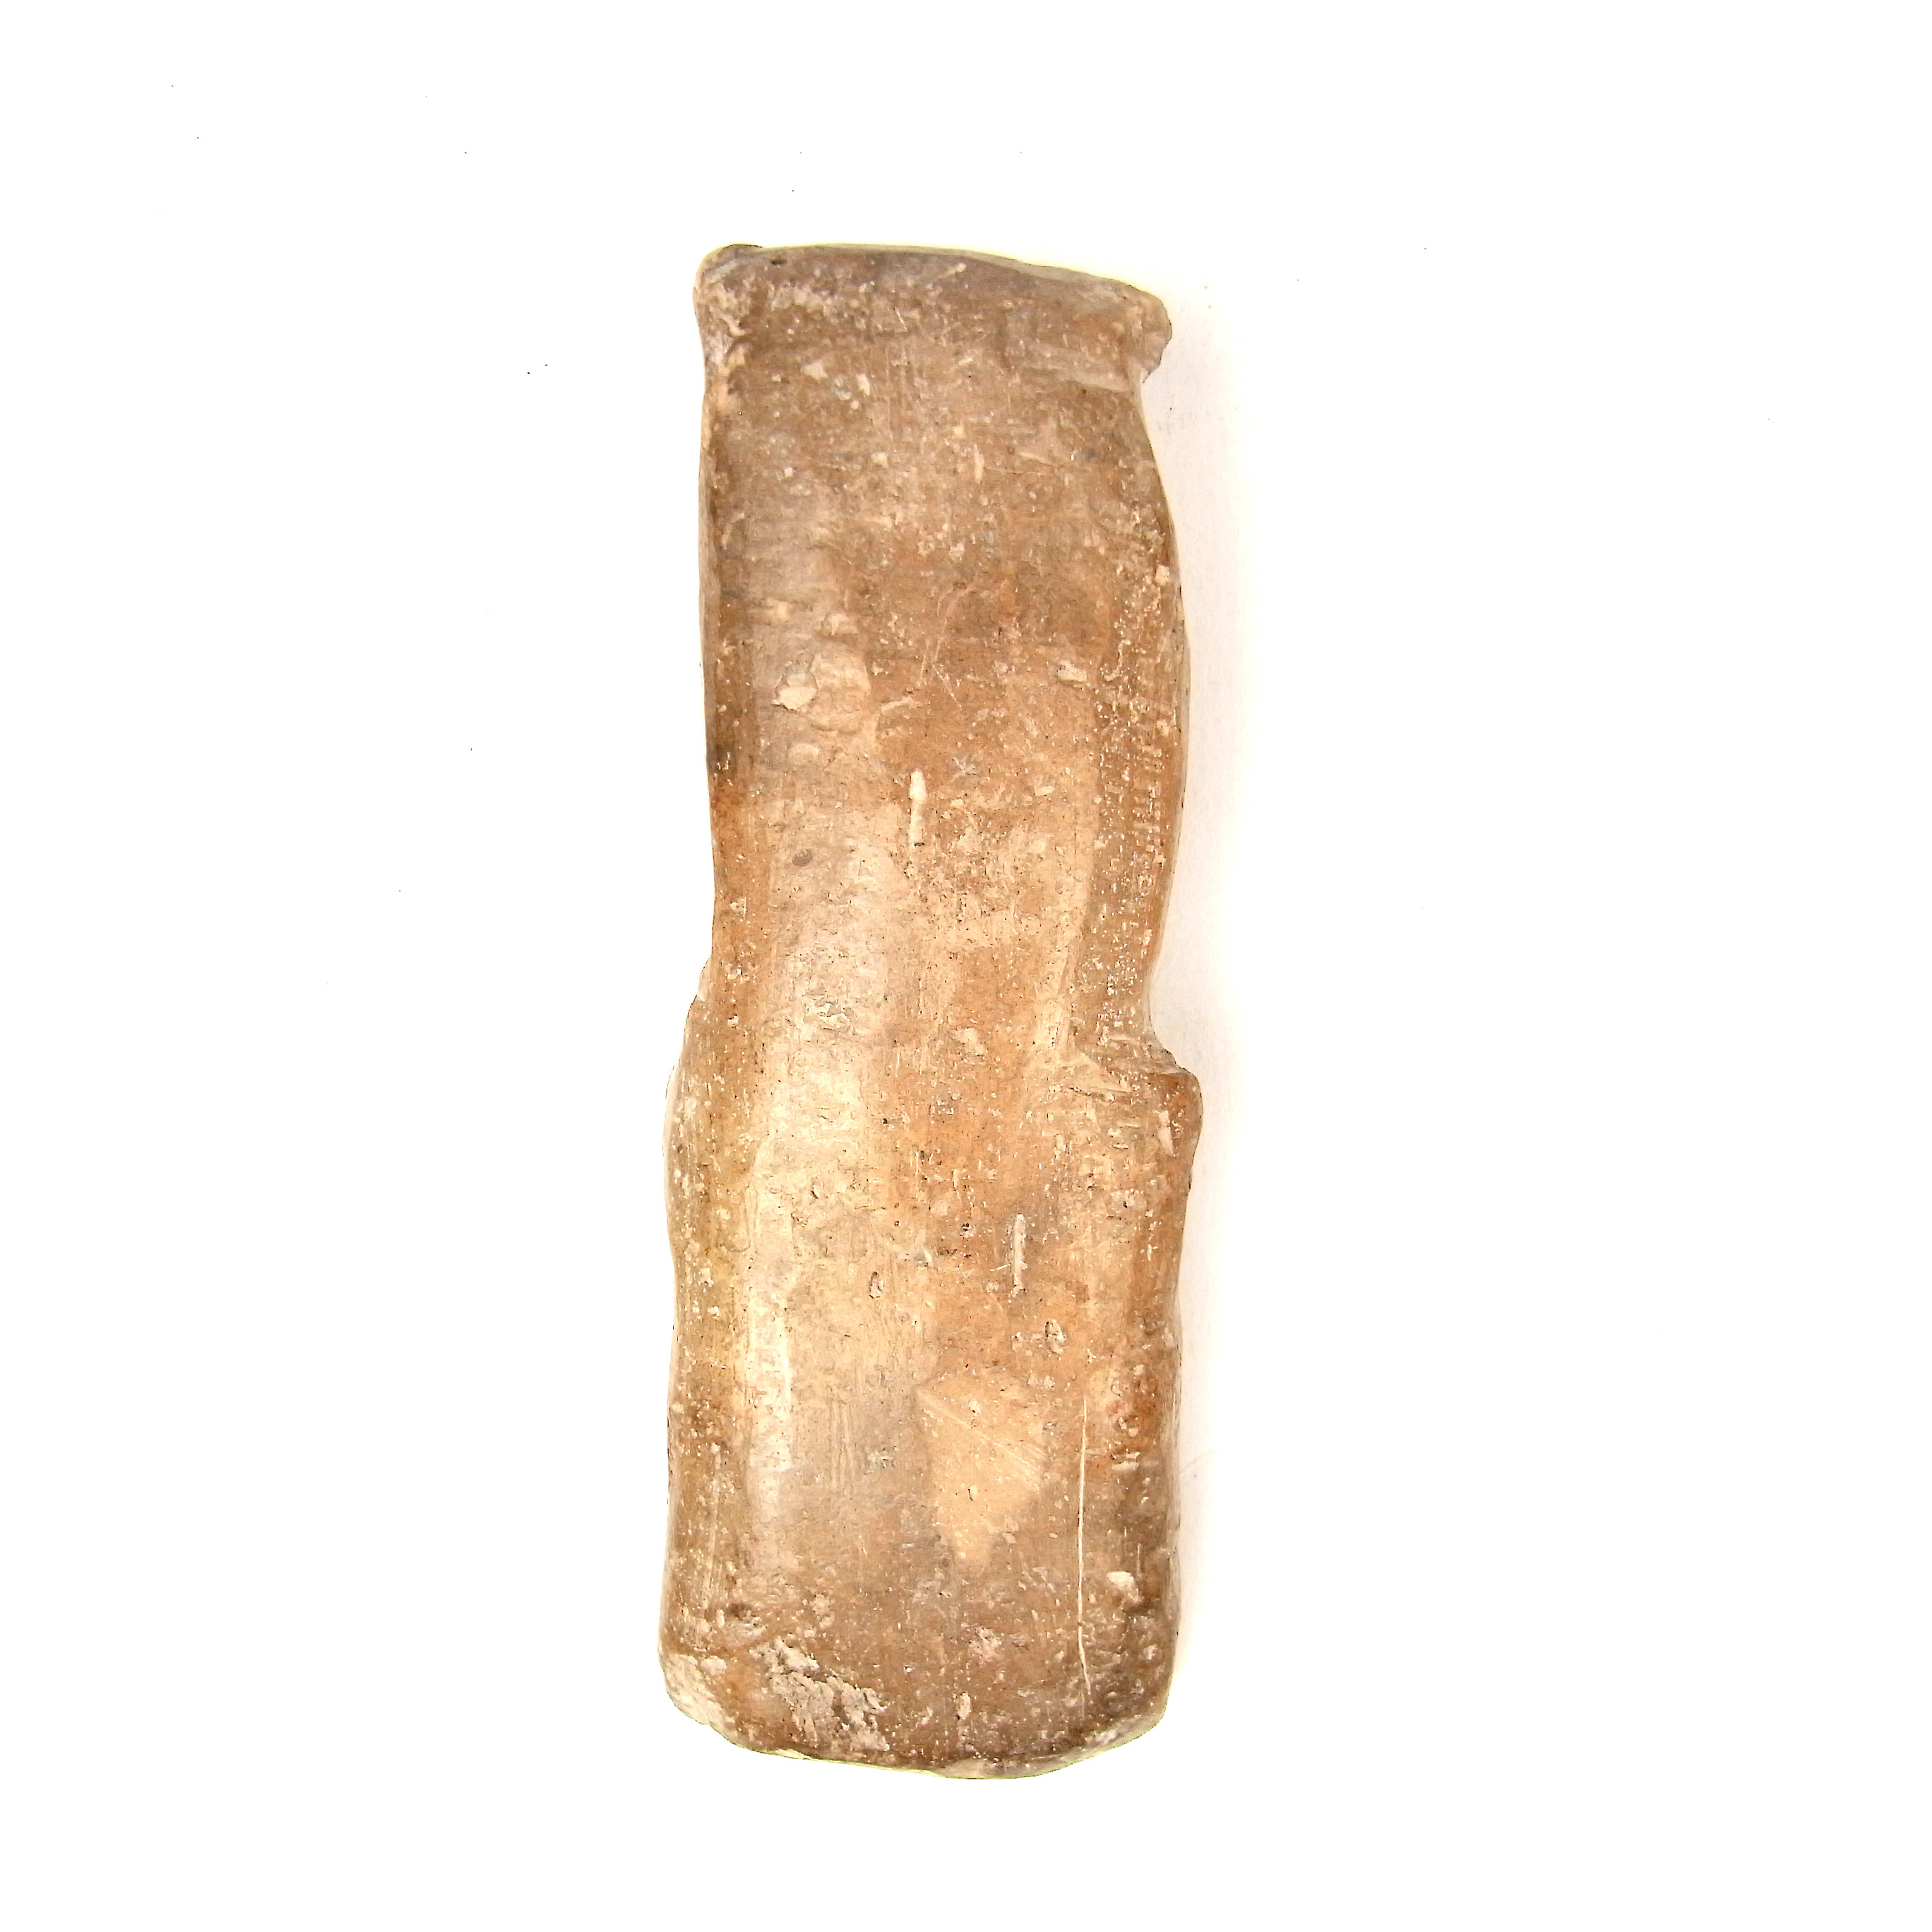 An Ancient Egyptian terracotta shabti inscribed with hieroglyphs - Image 2 of 2